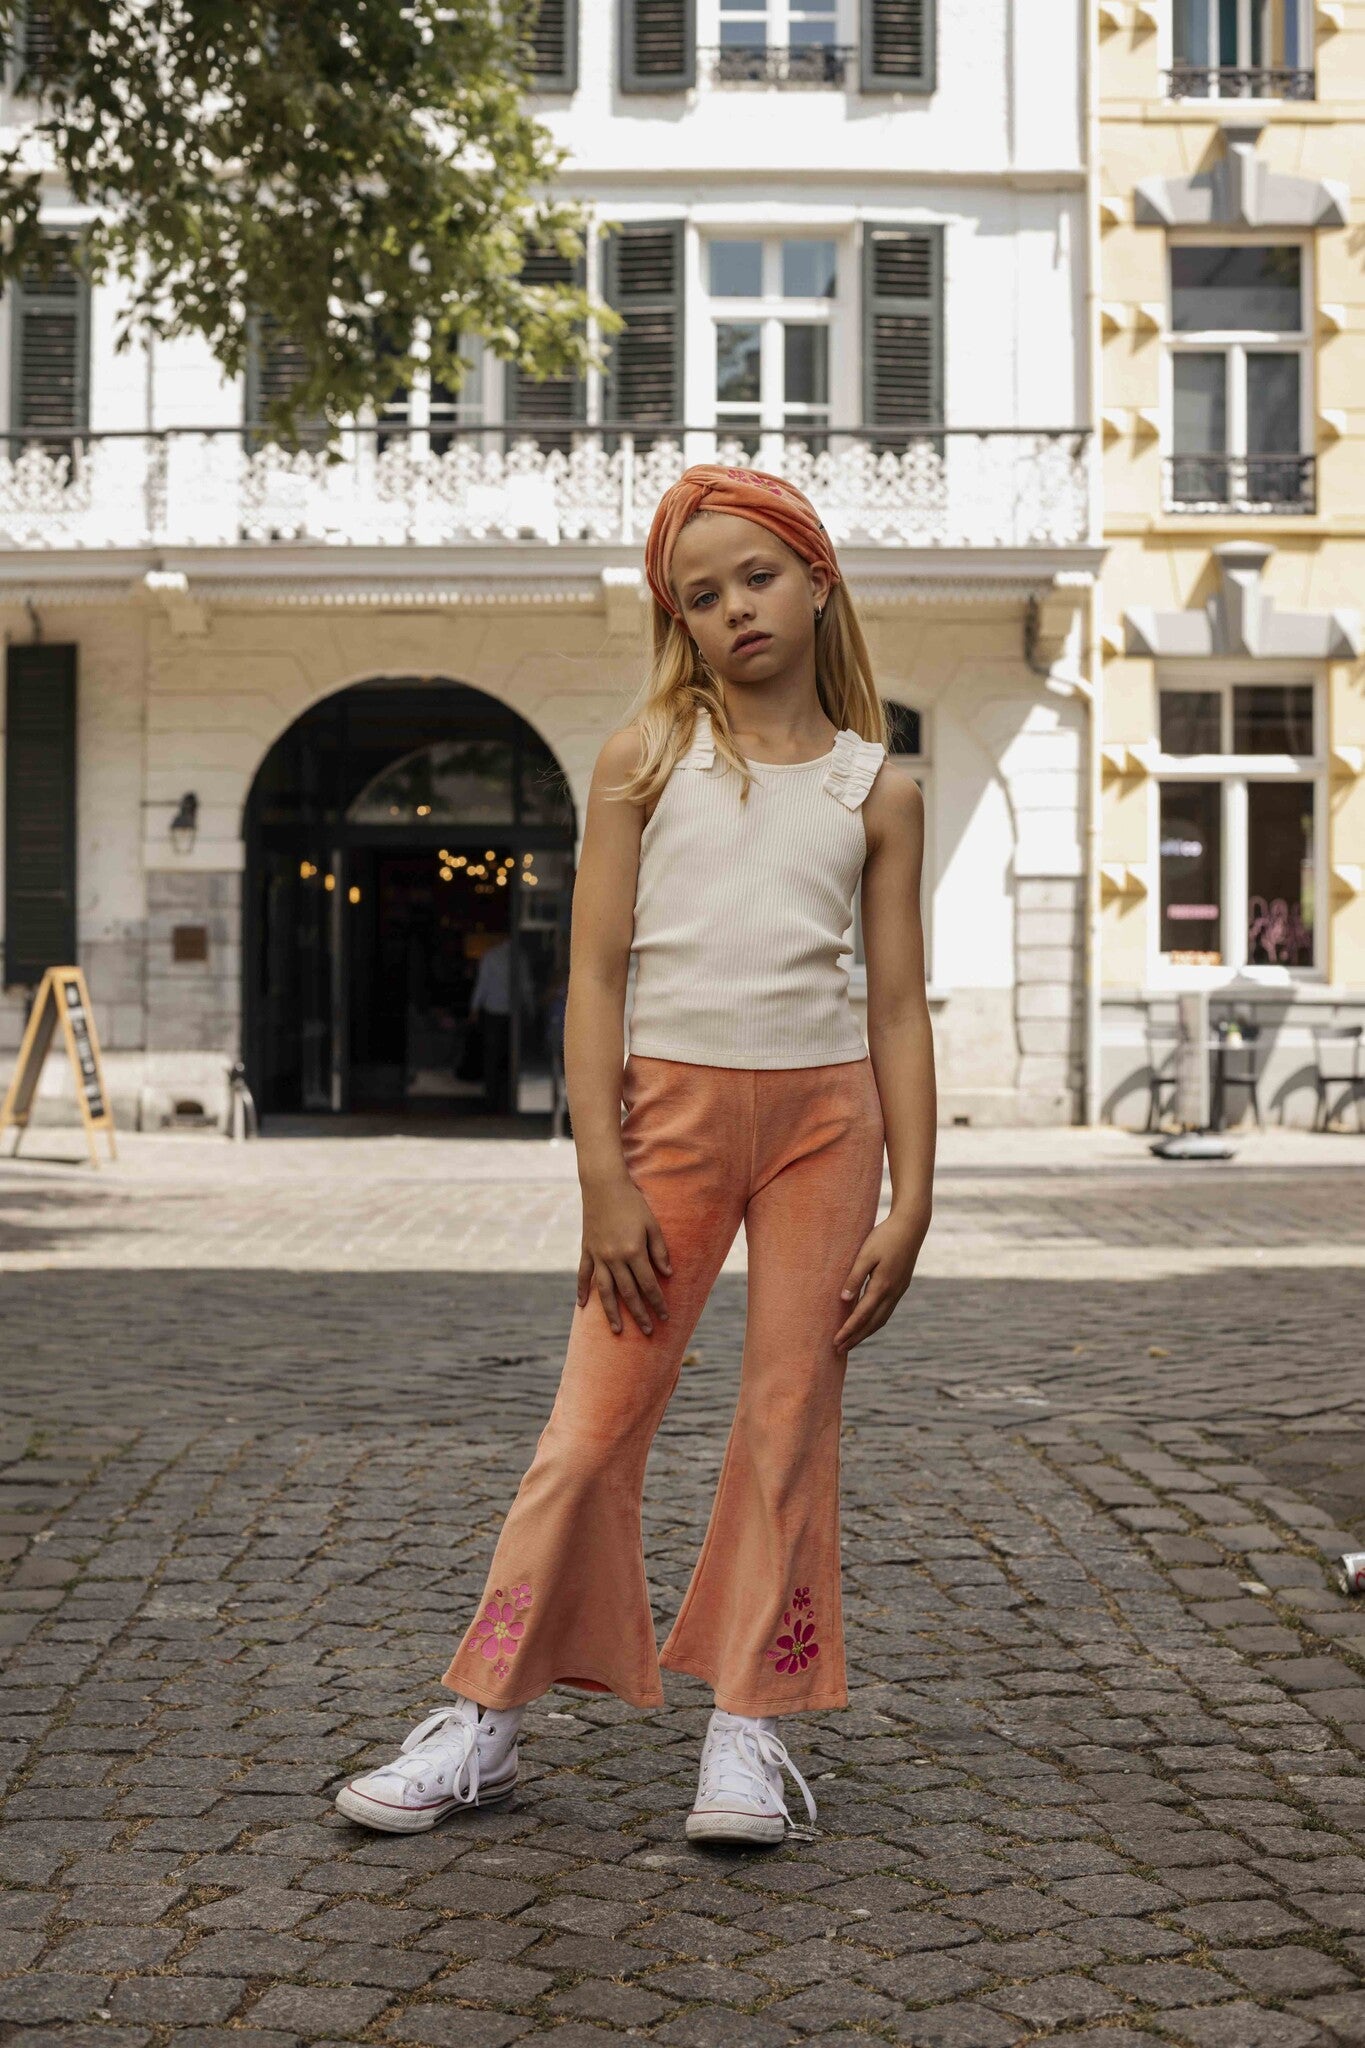 Children's Embroidered Floral Flares